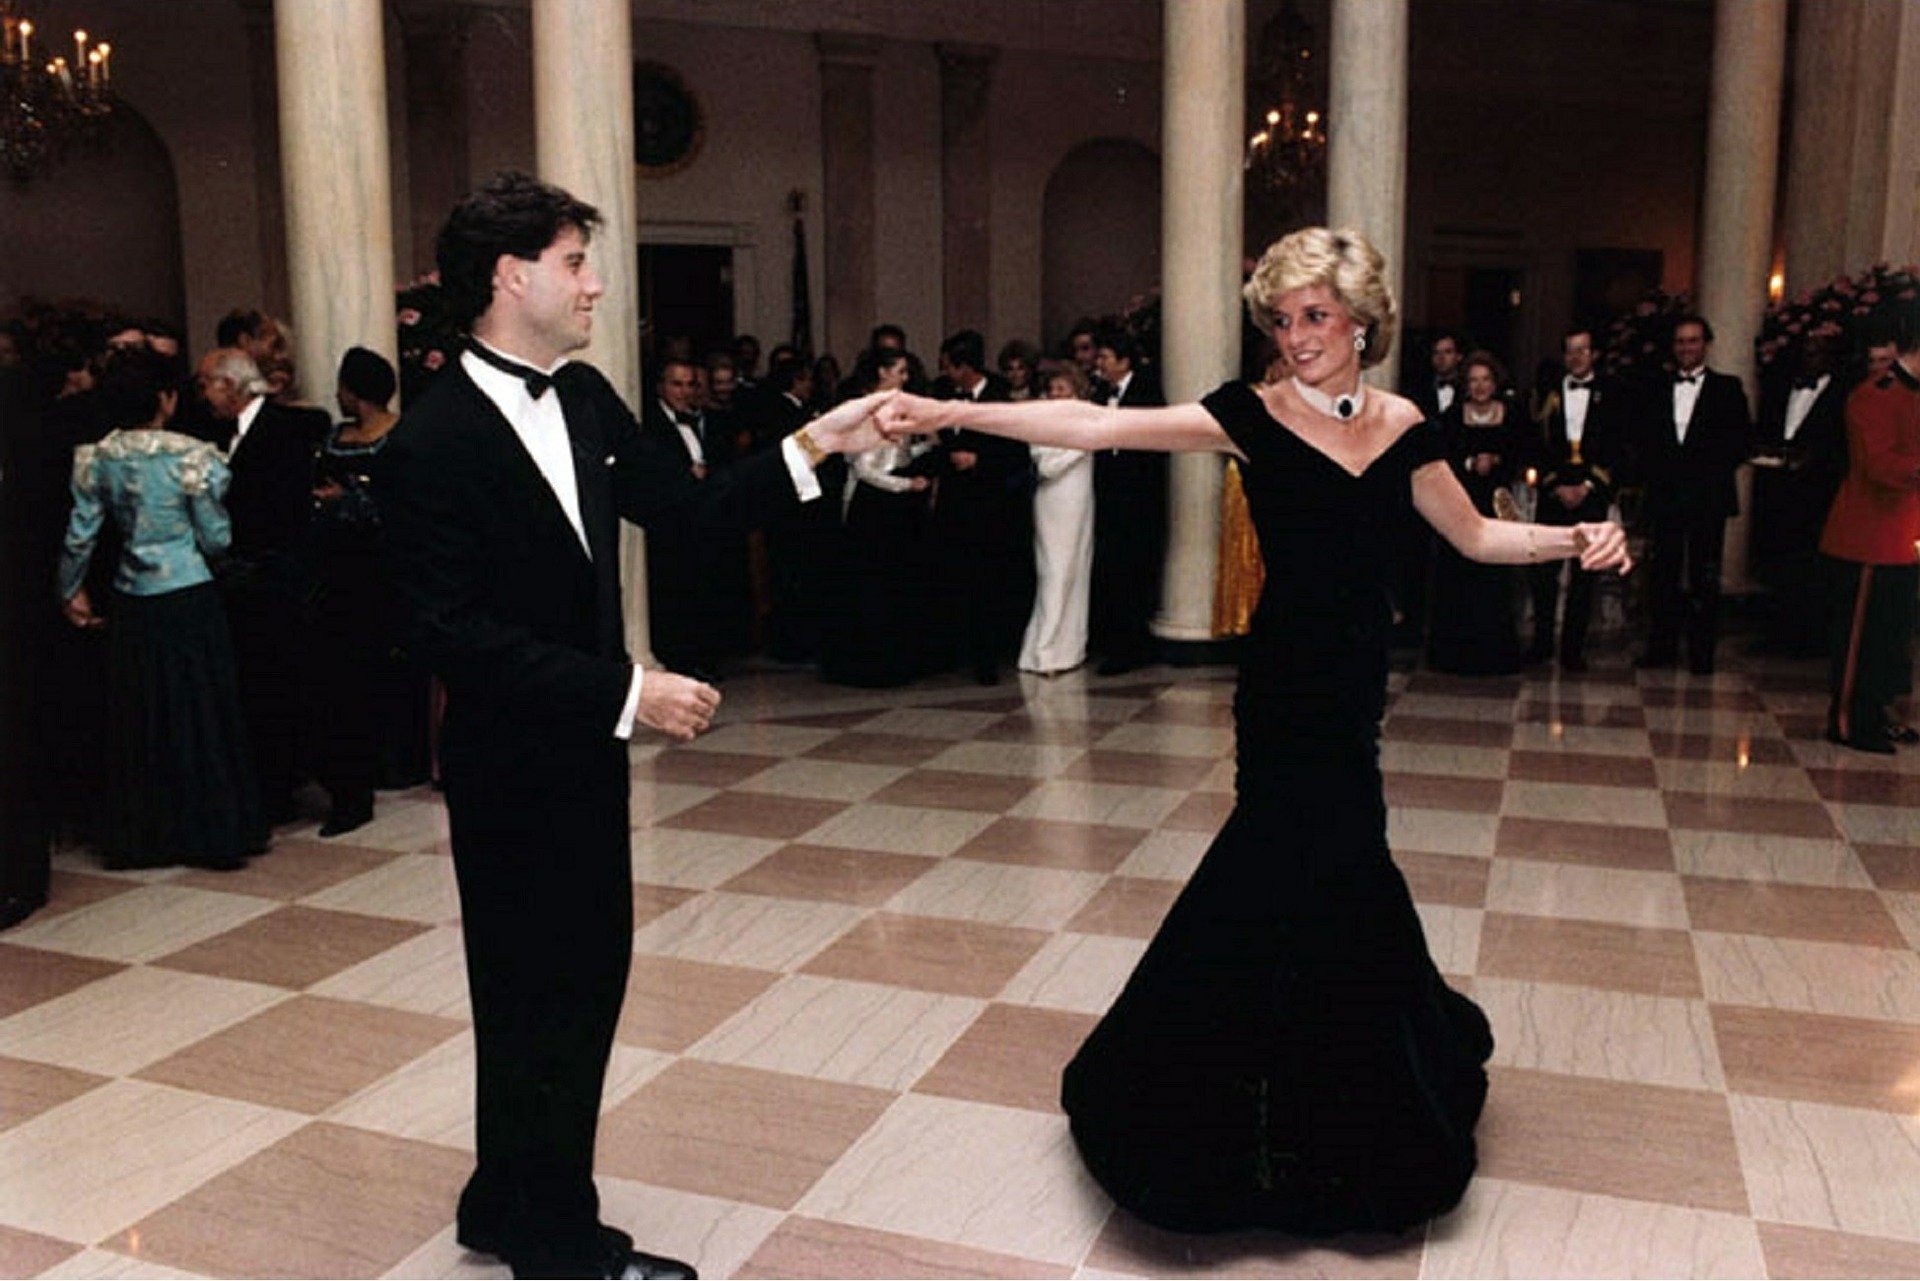 John Travolta twirls Princess Diana on the dance floor while at a White House banquet in 1895. | Source: Pixabay